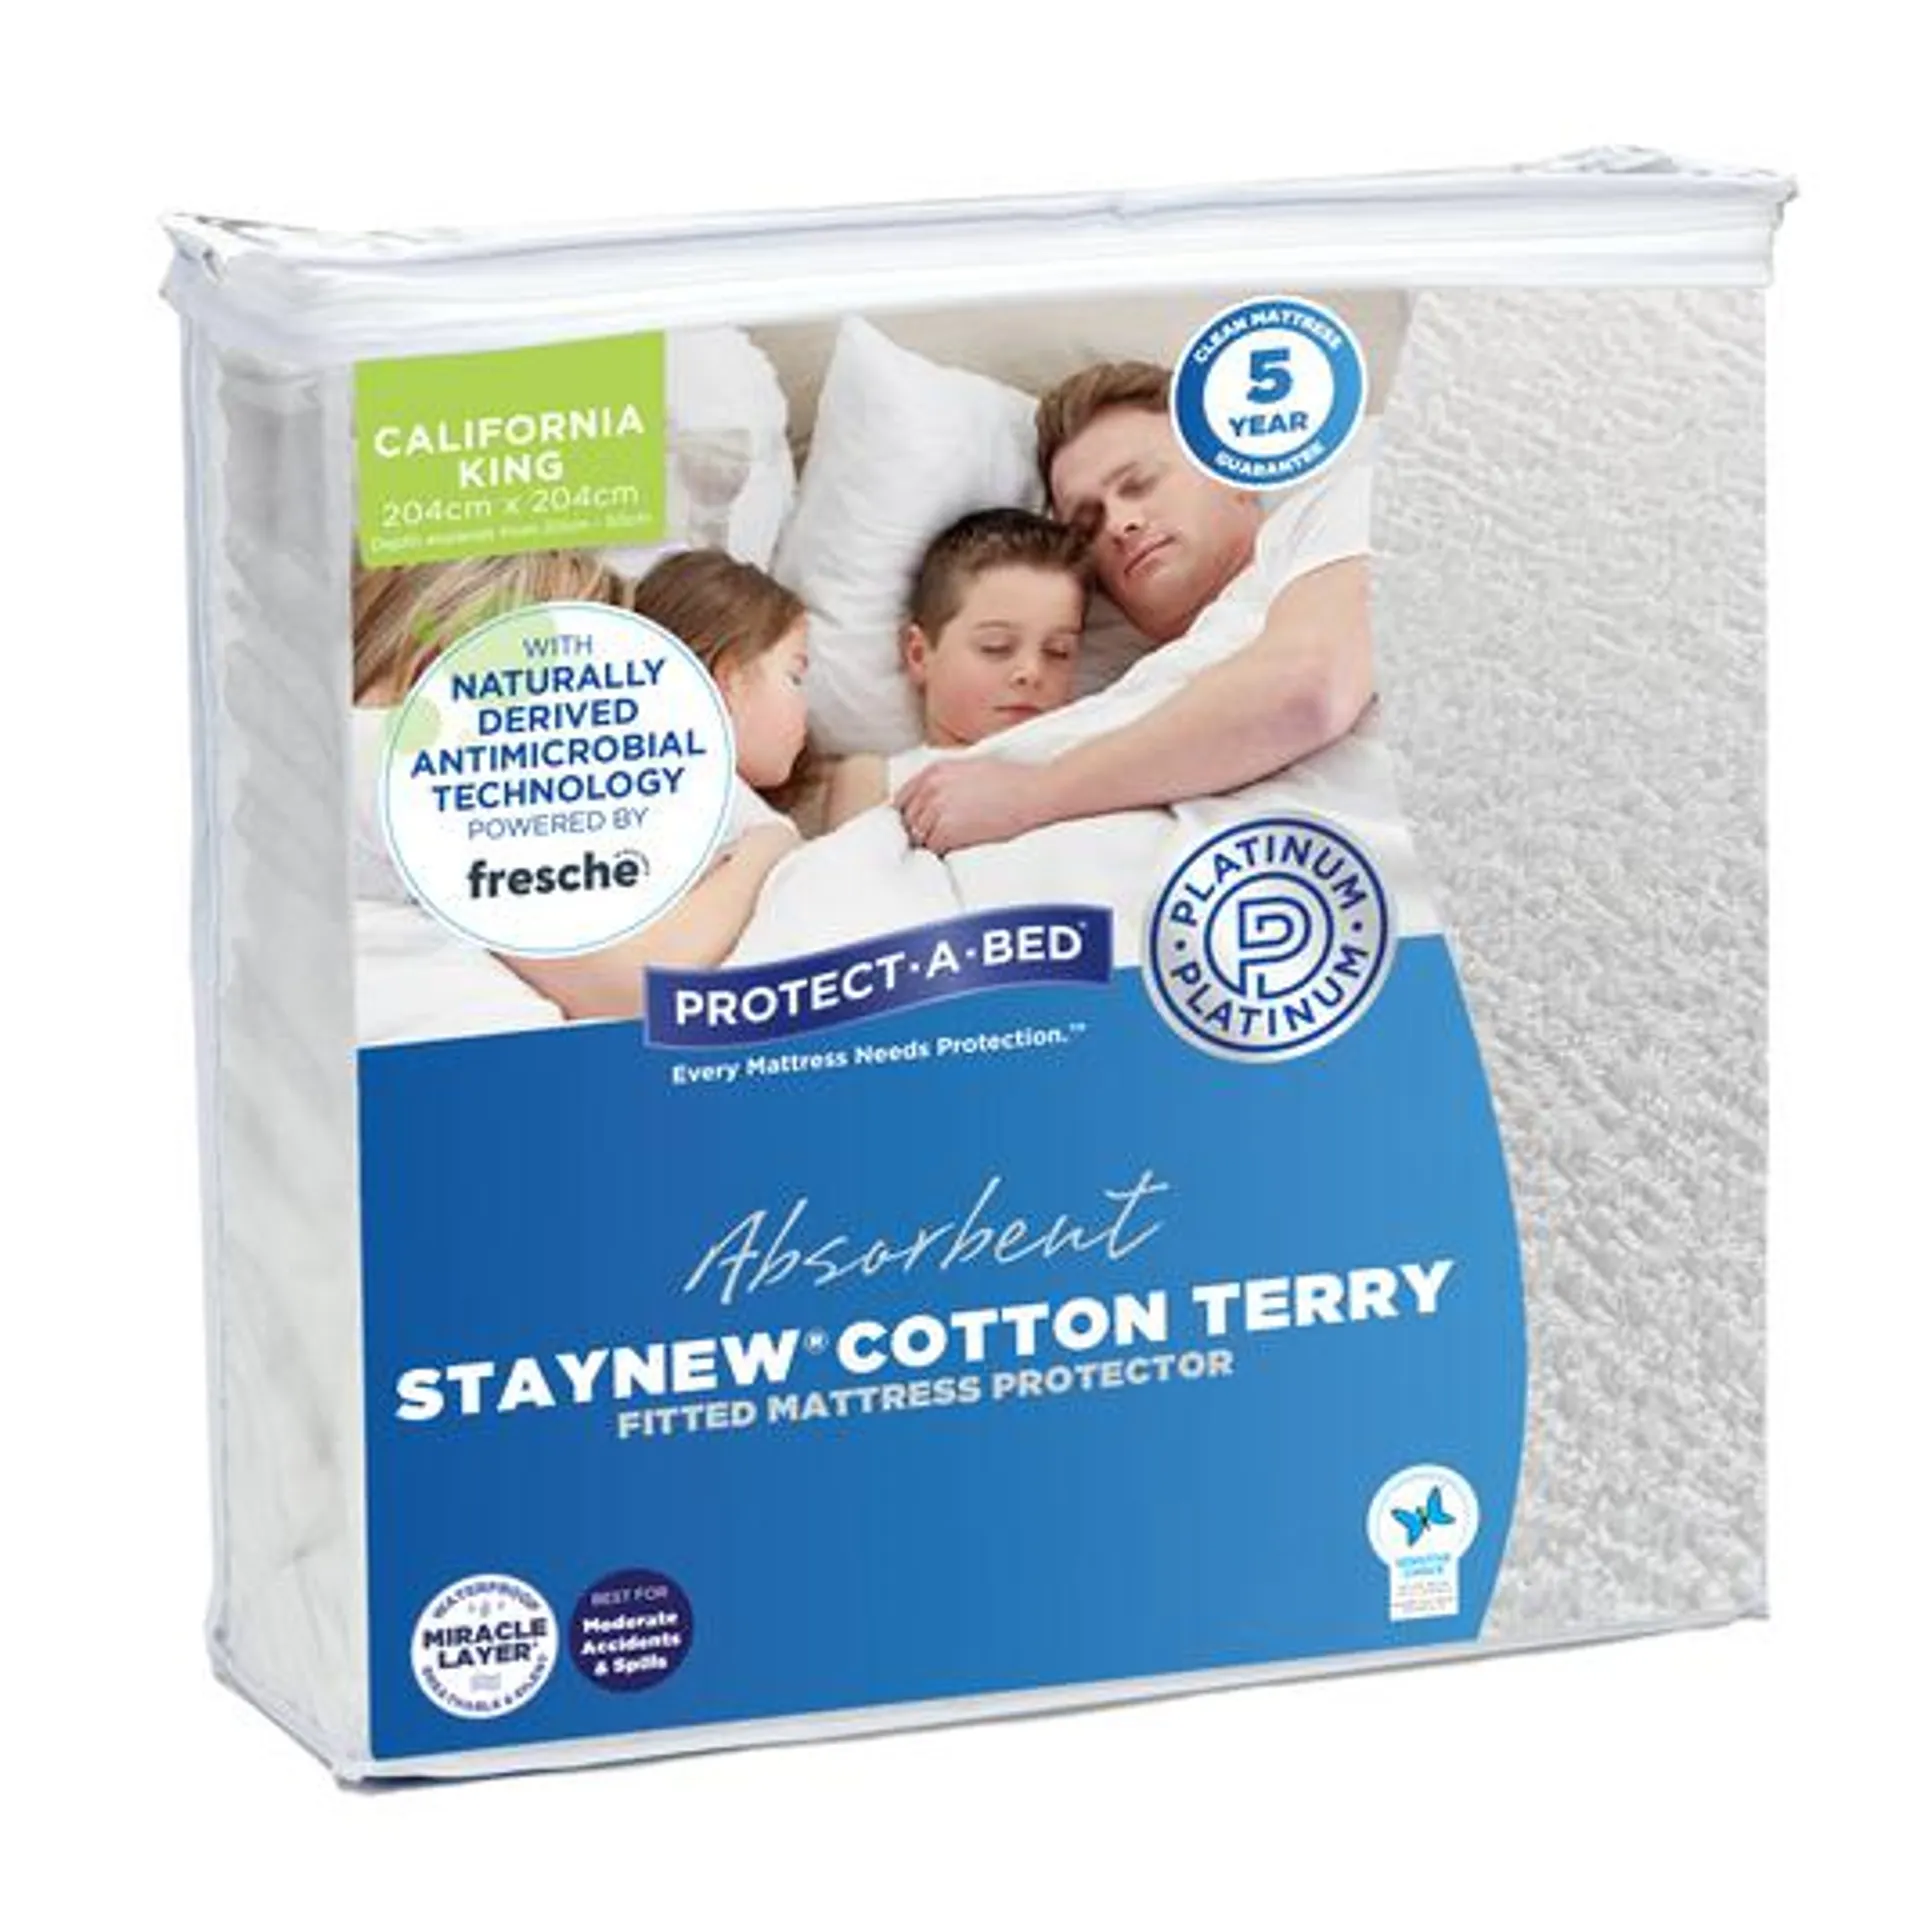 Protect-A-Bed Staynew® Cotton Terry Cali King Mattress Protector